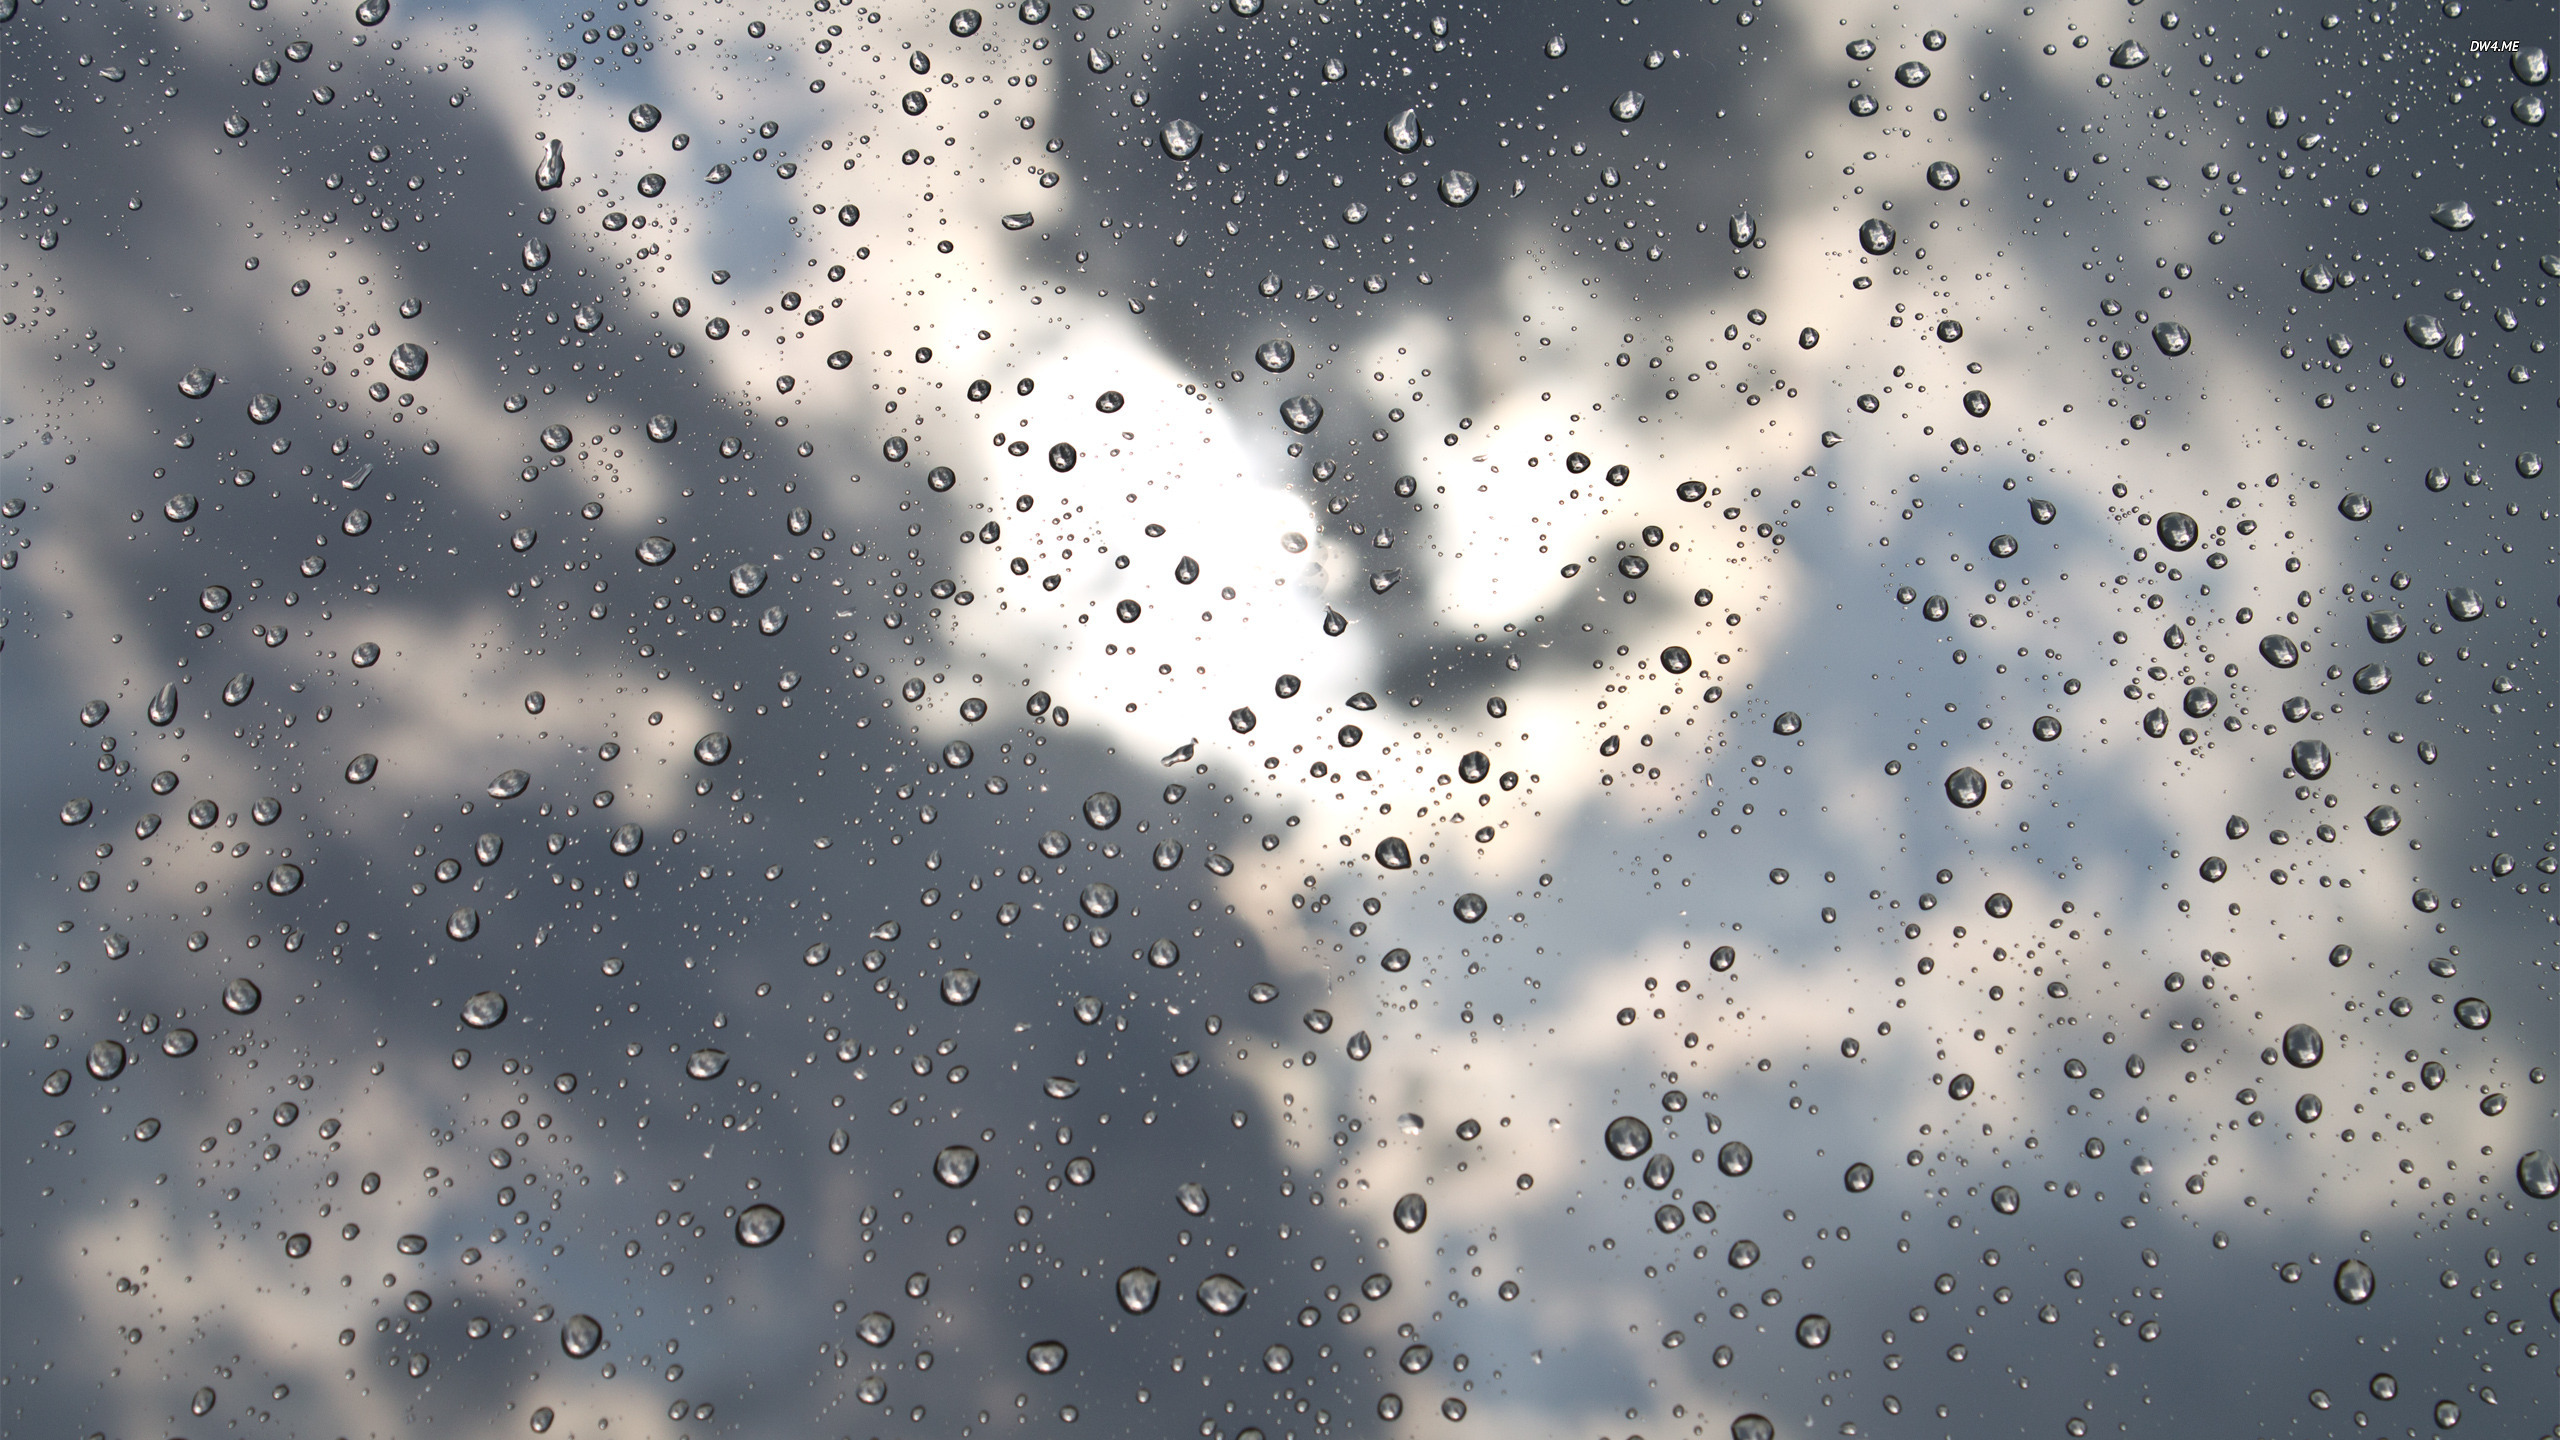 Raindrops and sunshine wallpaper   Photography wallpapers   573